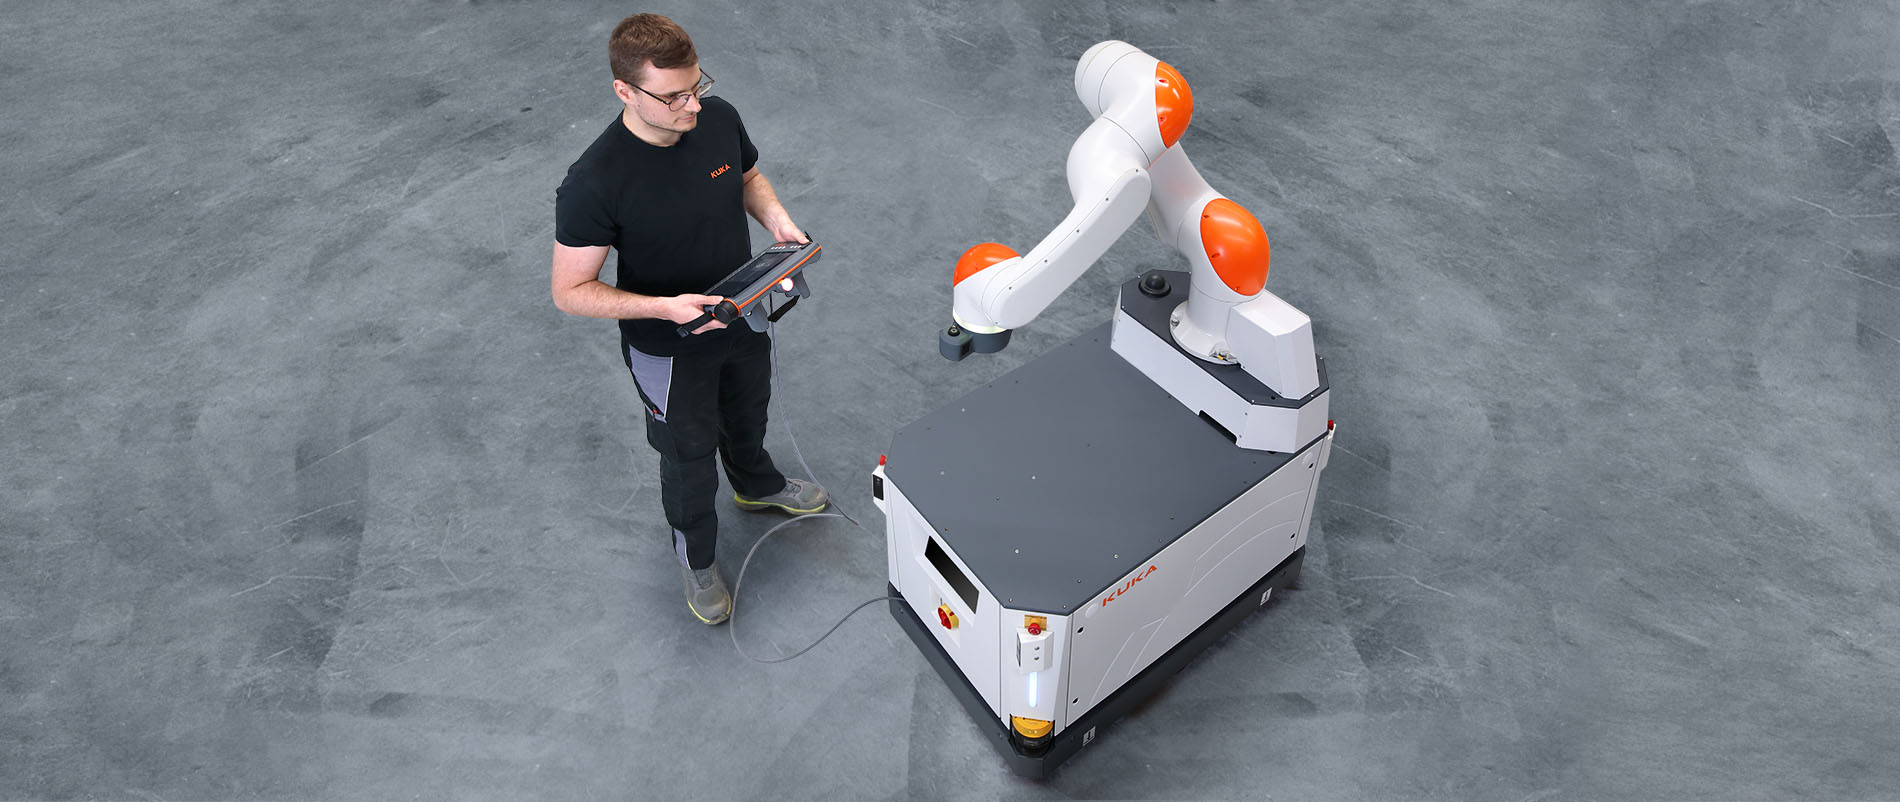 The autonomous mobile robot makes human-machine collaboration possible and improves your company's intralogistics operations